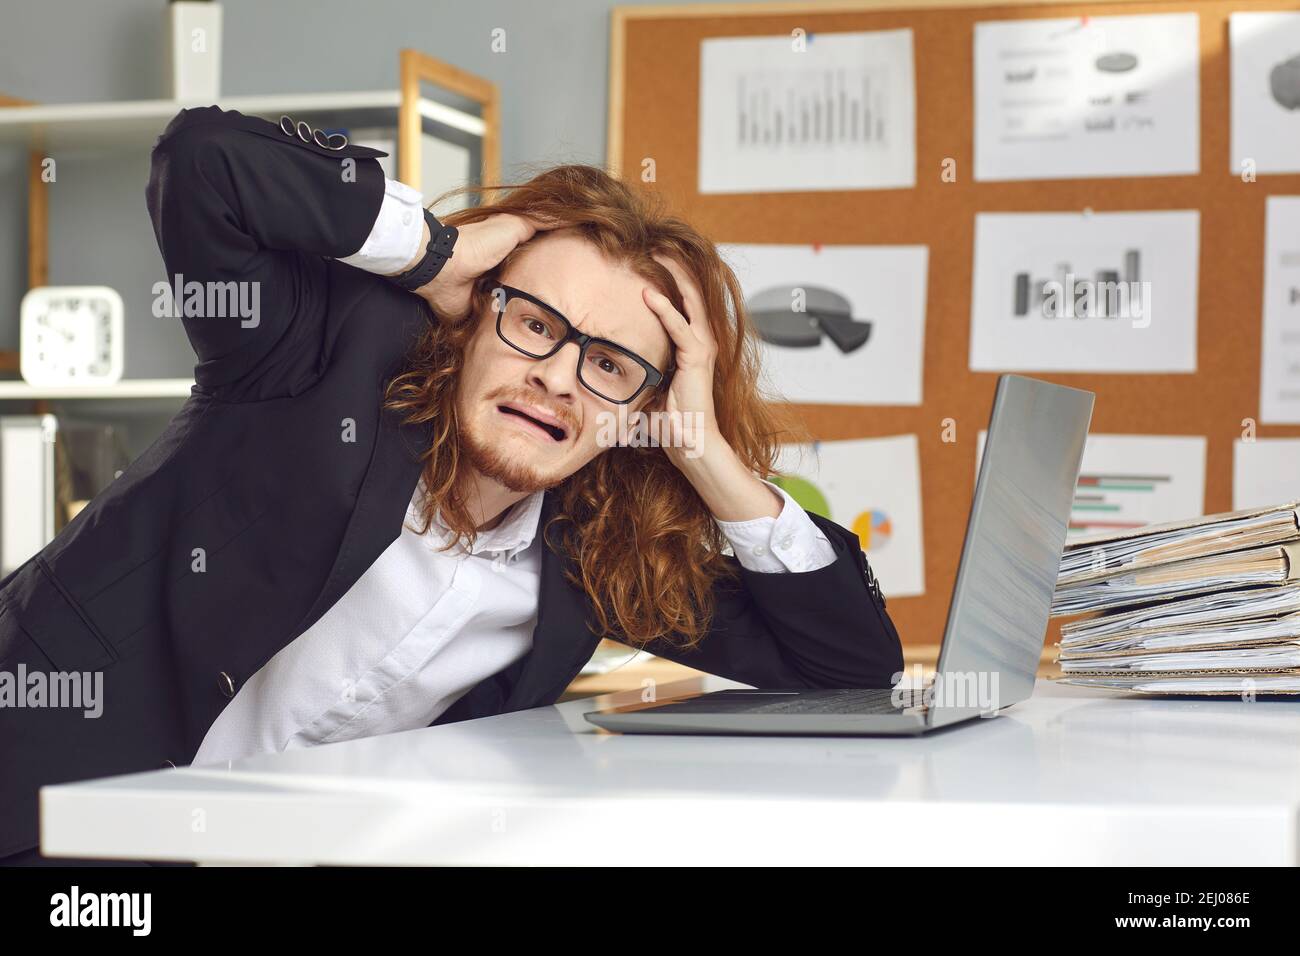 Funny young weird stressed man accountant sitting at laptop touching head feeling burnout Stock Photo